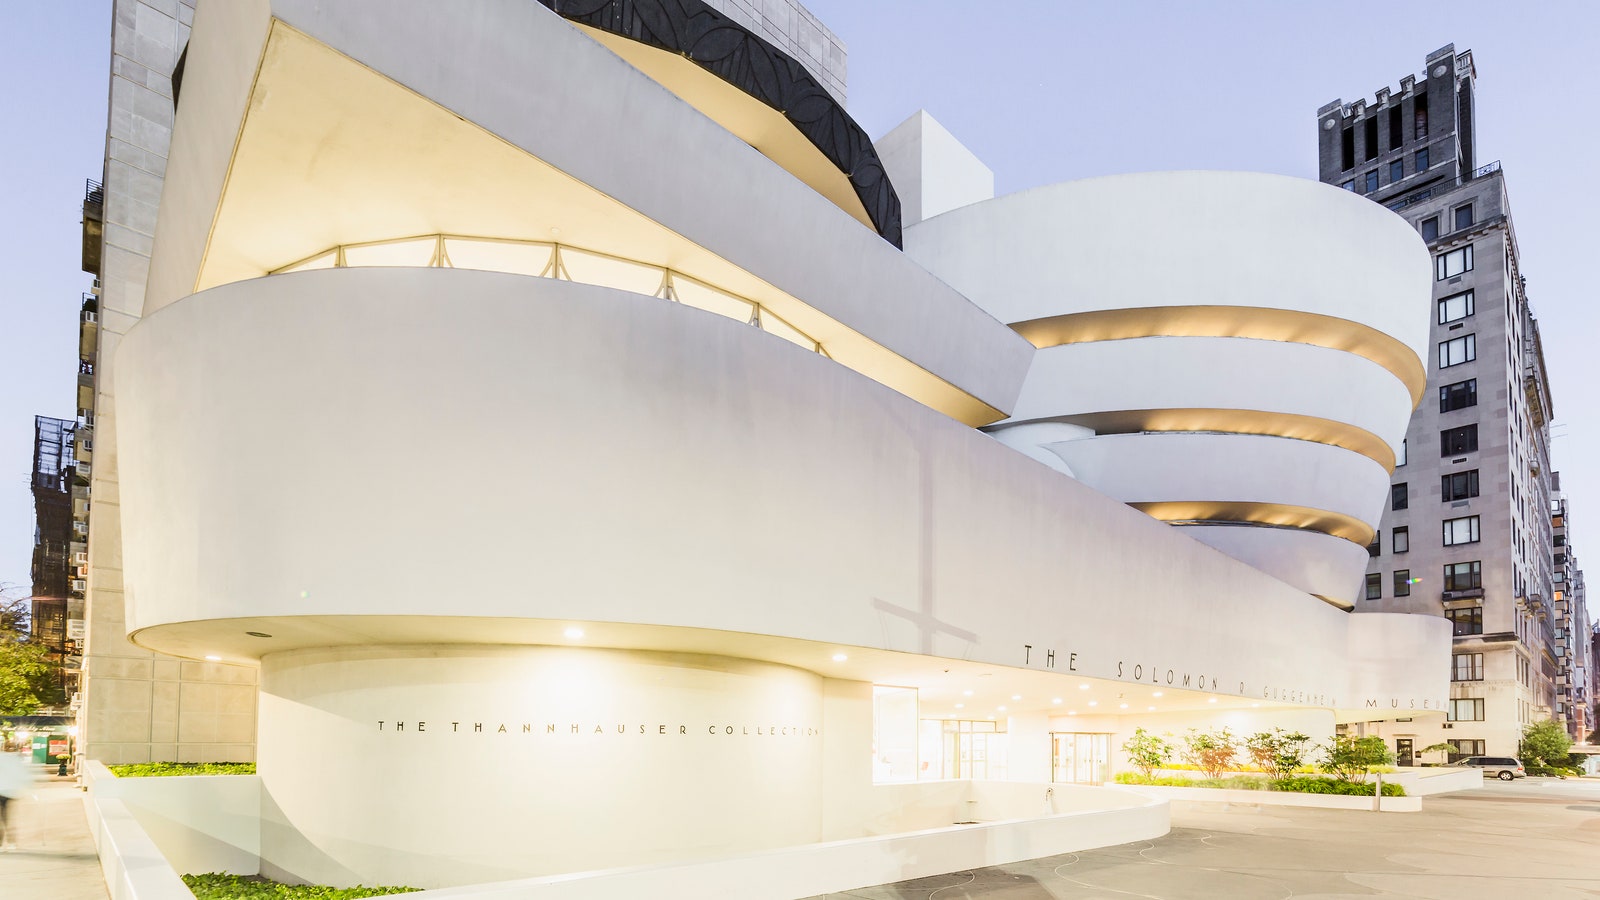 9 Things You Didn’t Know About New York City’s Guggenheim Museum